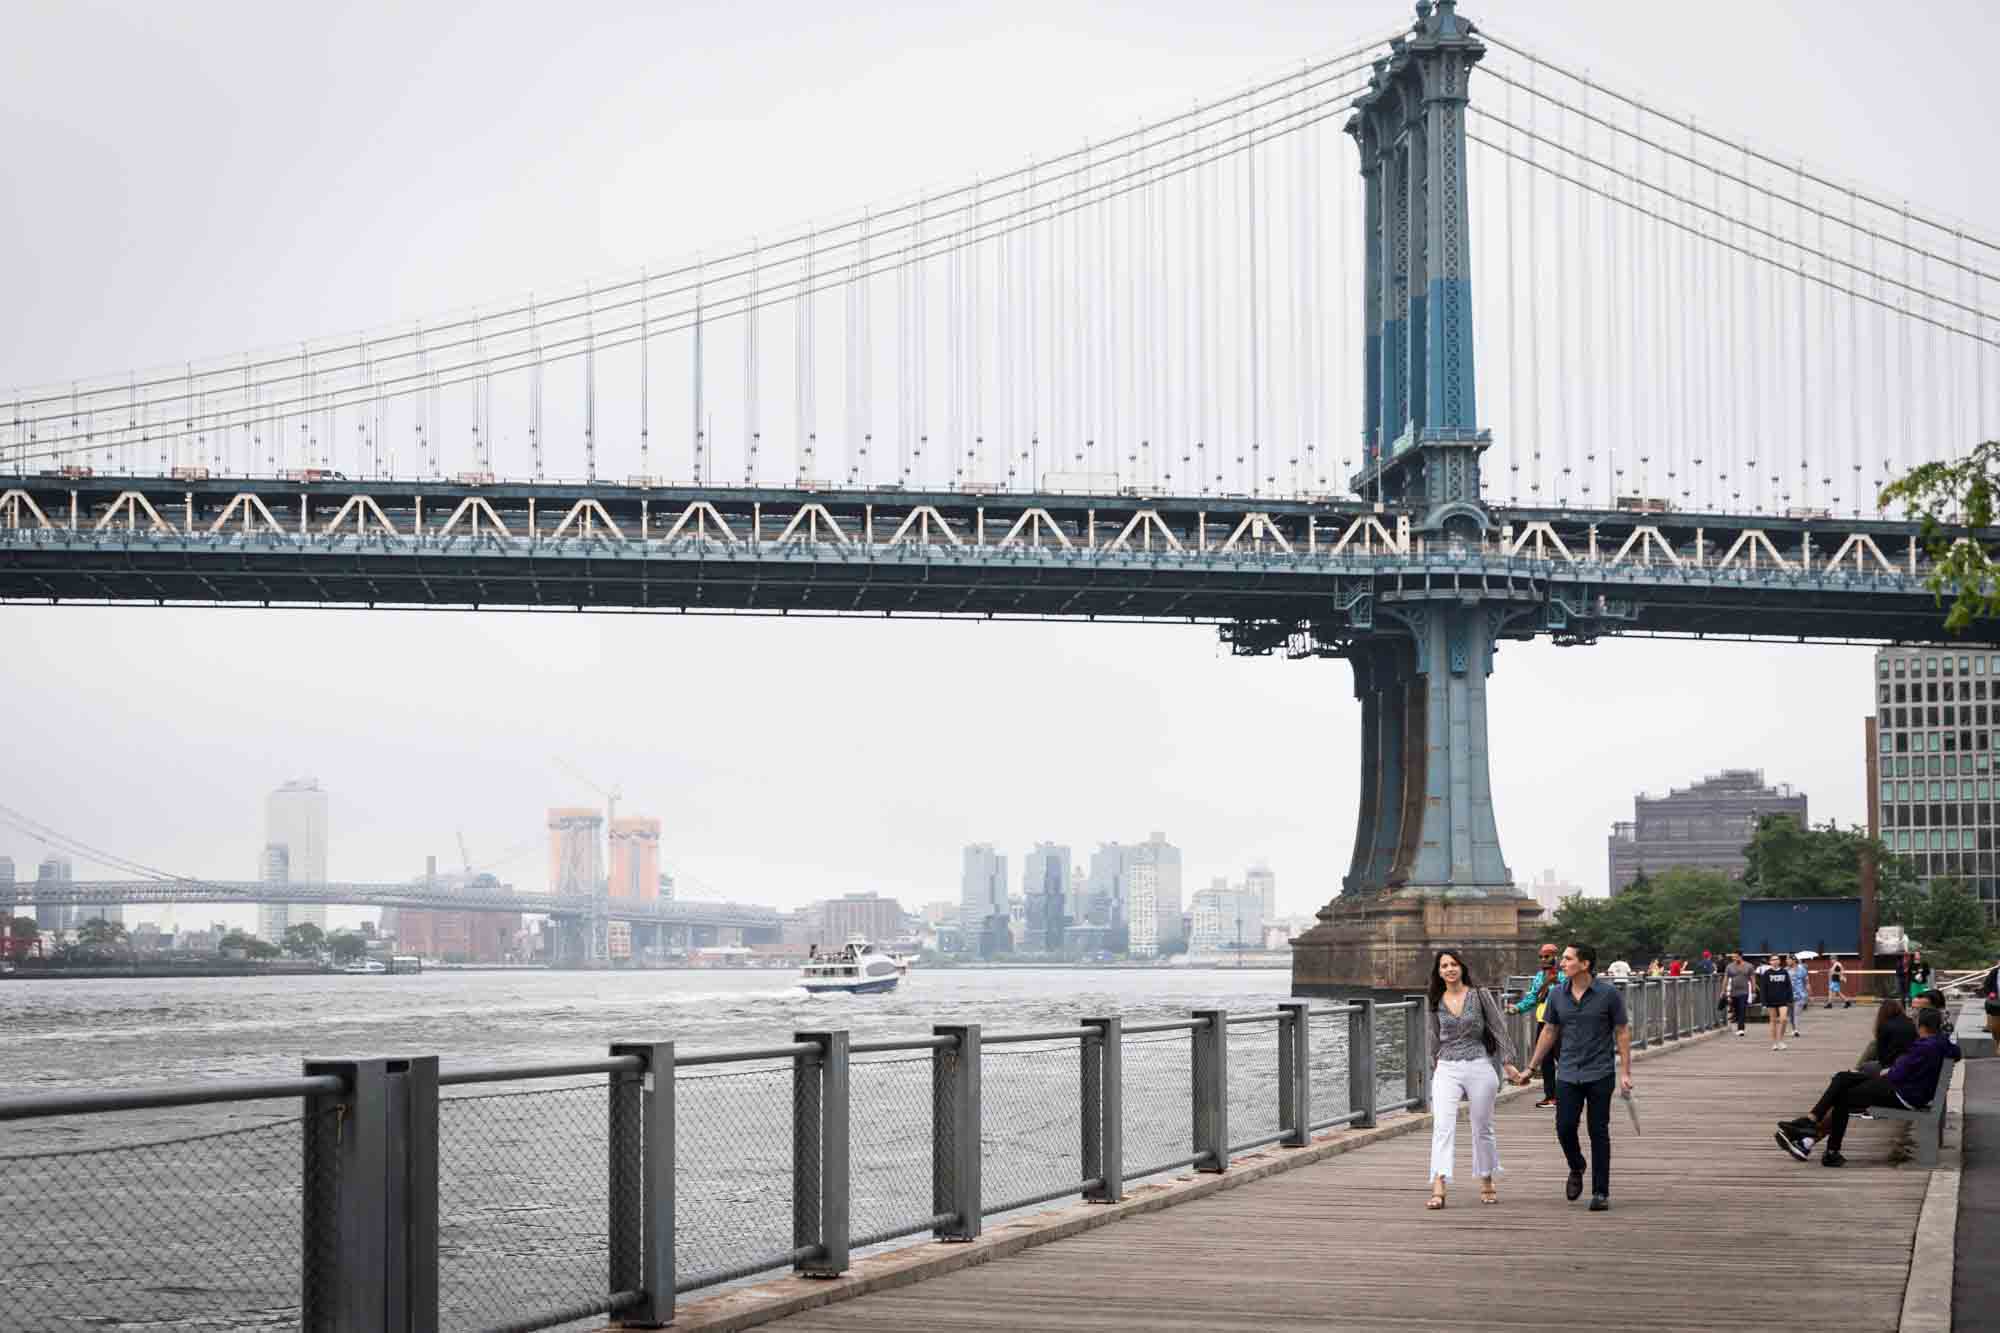 Couple walking along boardwalk in with Manhattan Bridge in background for an article on Brooklyn Bridge Park rainy day photo locations